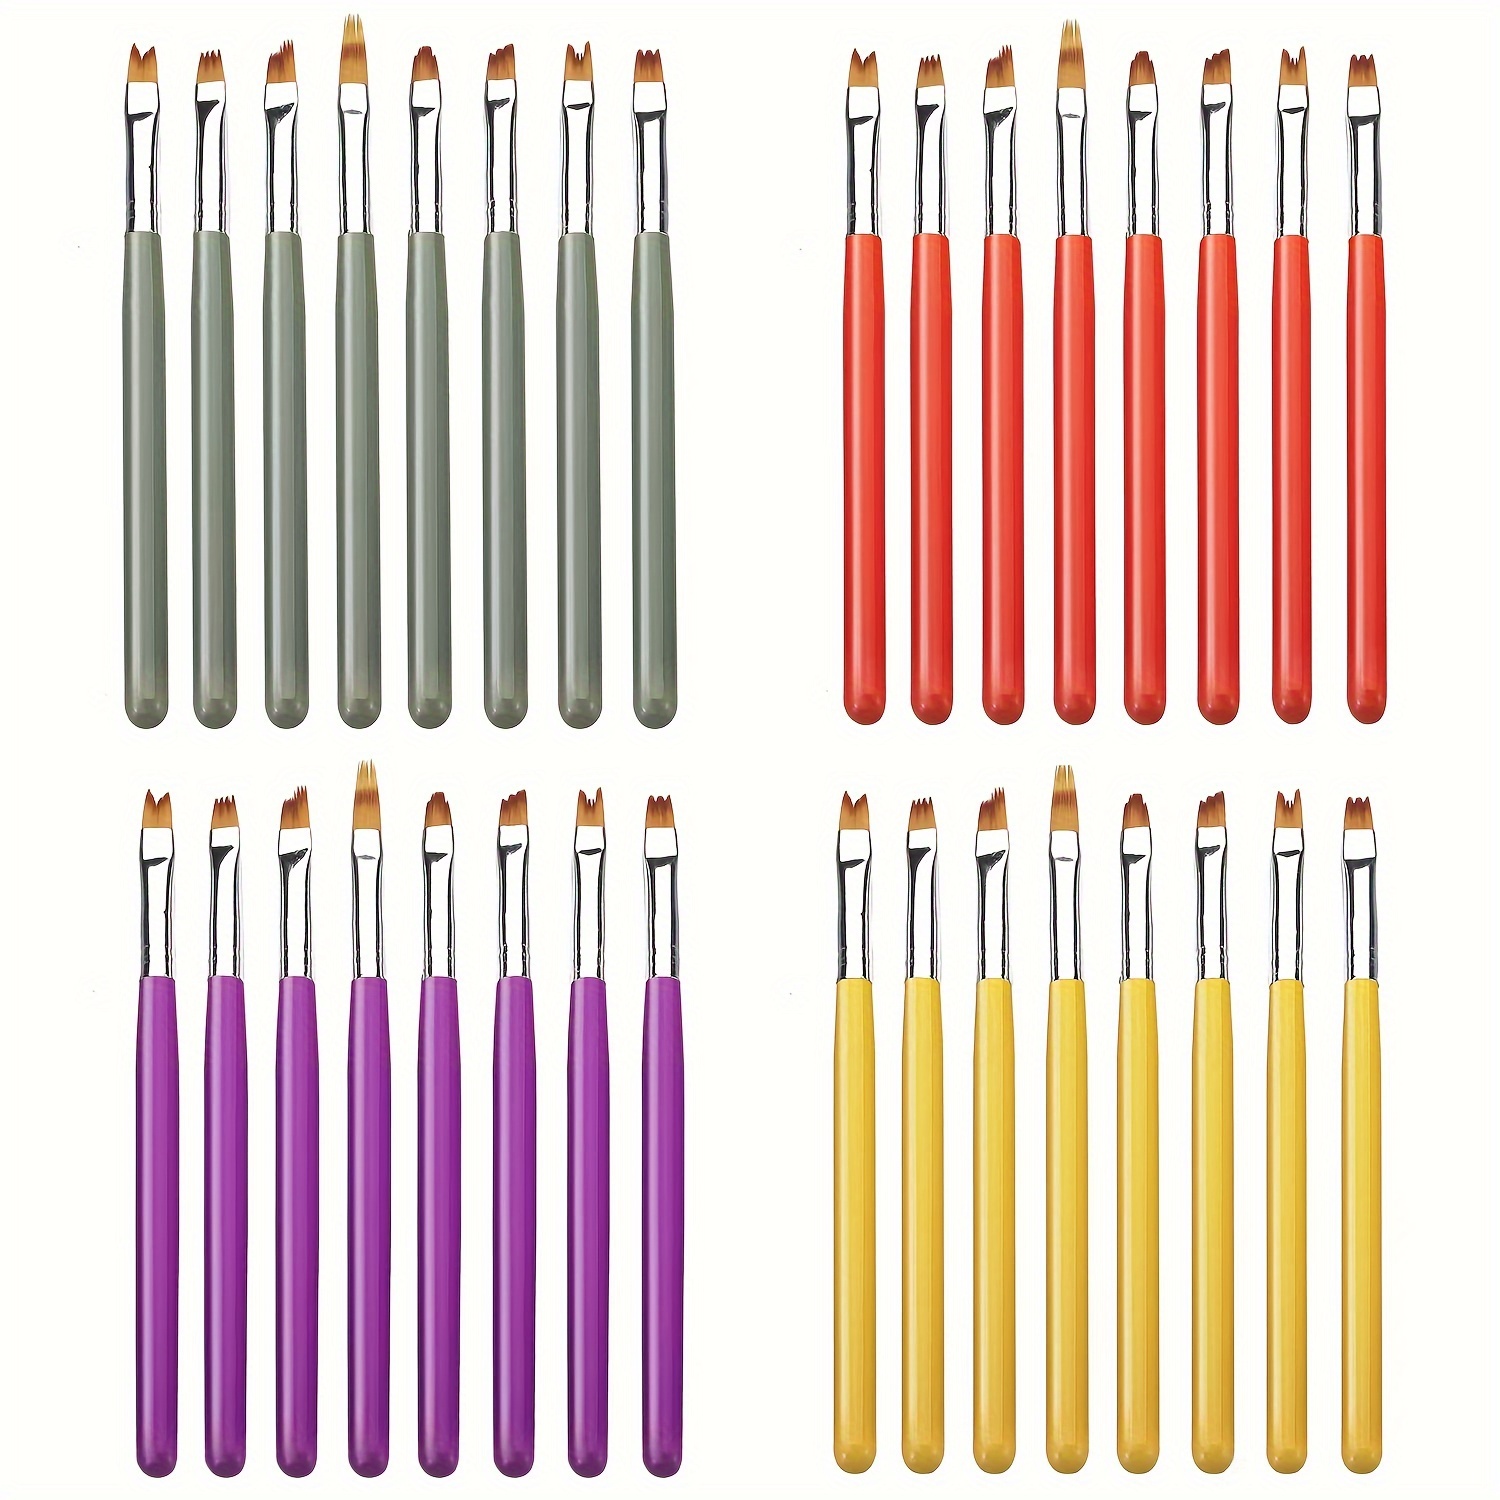 

Nail Art Petal Pens - 8 Piece Set Of Formaldehyde-free Nail Art Brushes For Painting And Detailing